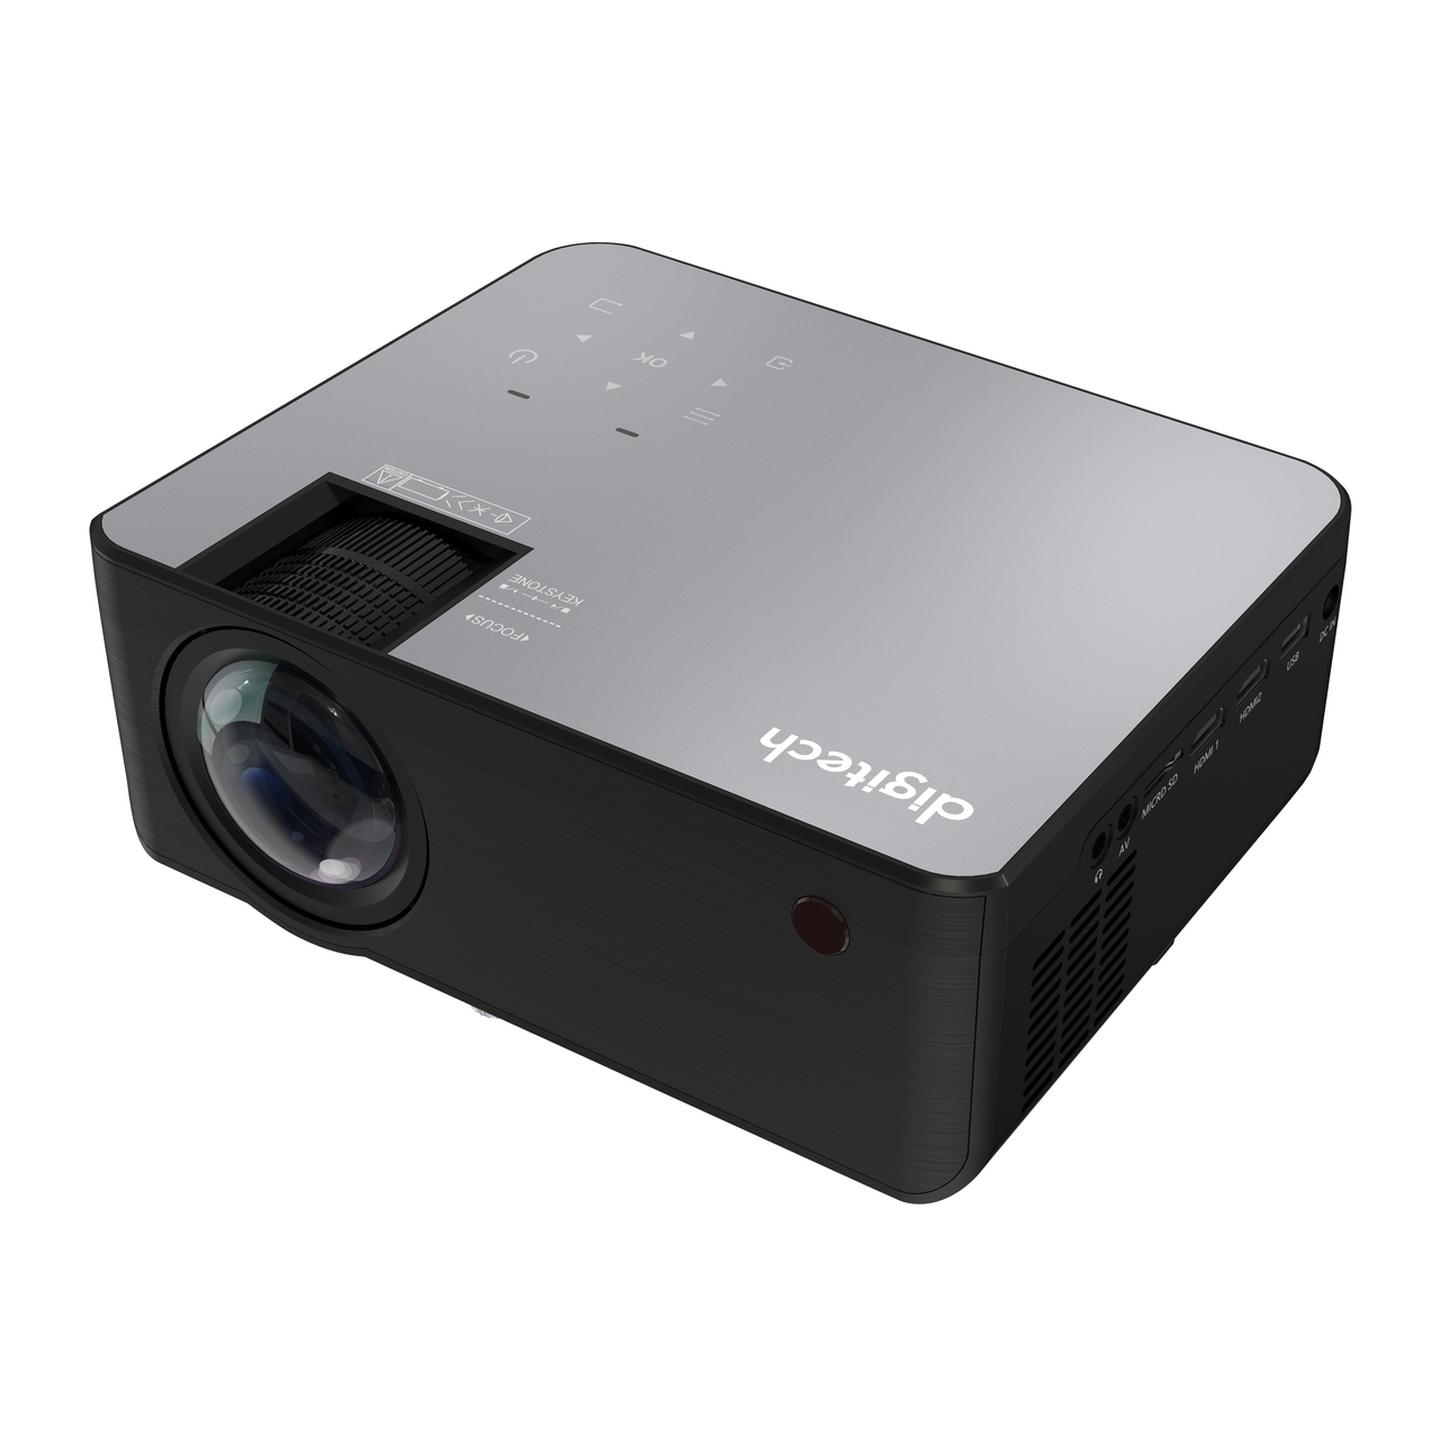 Digitech HD Projector with HDMI USB and VGA Inputs and Built-in Speakers